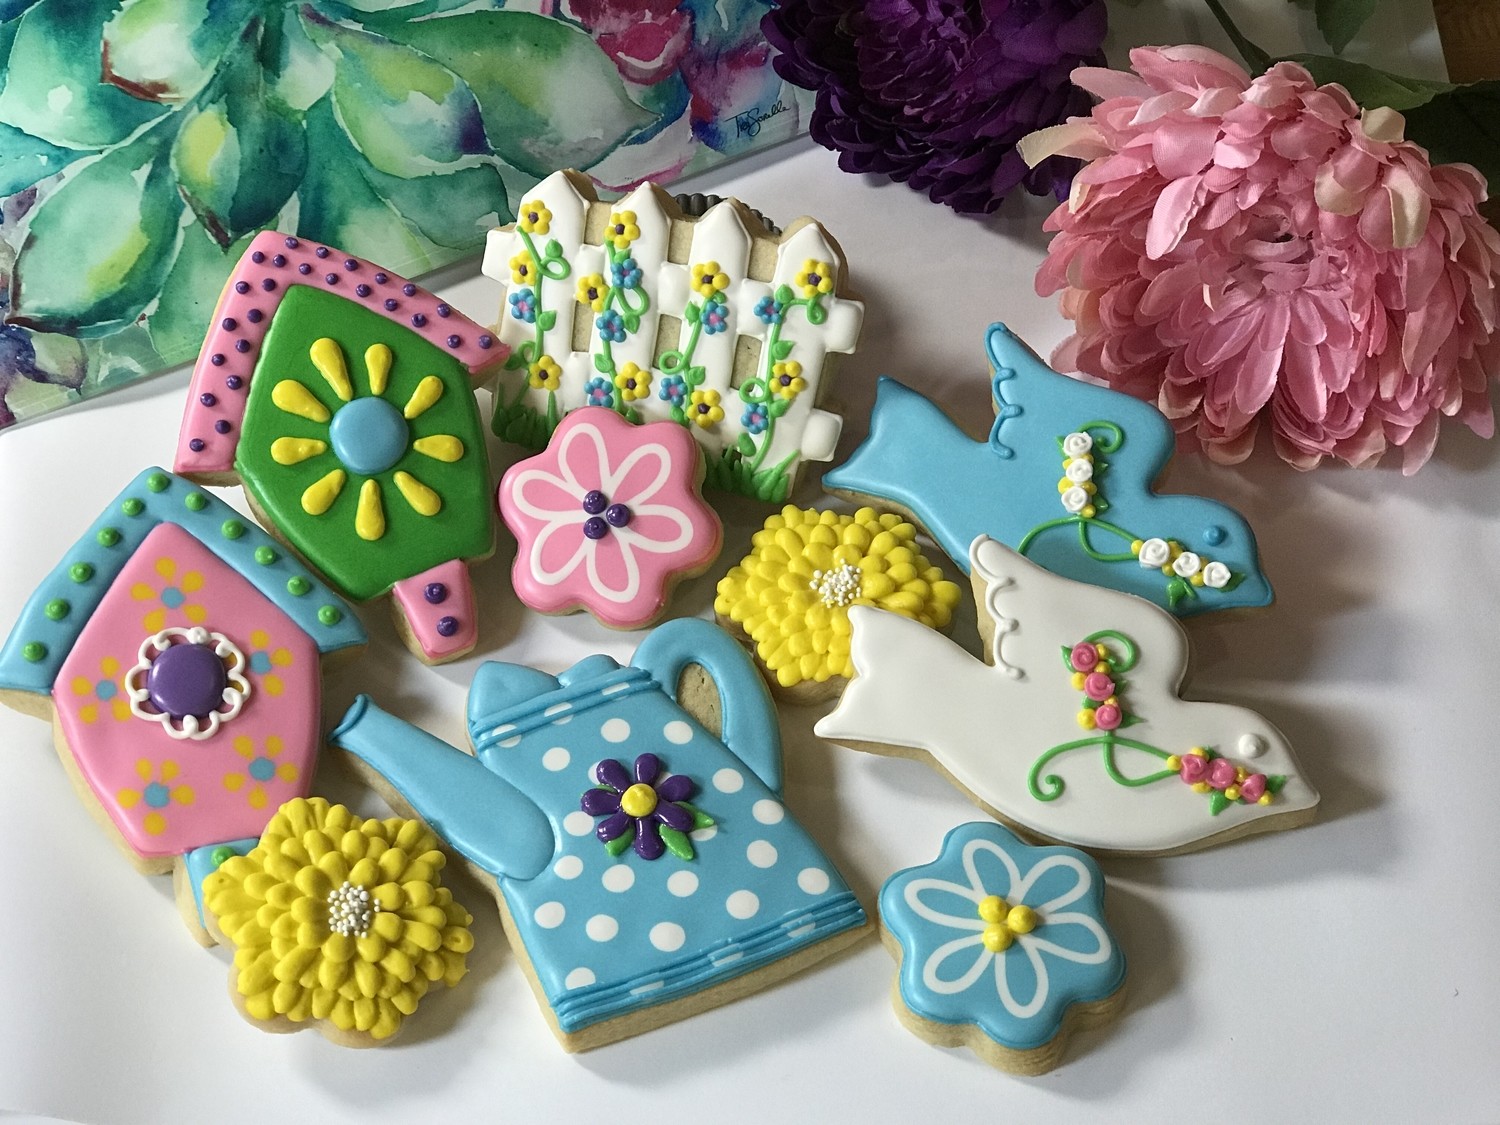 SPRING Decorating Workshop - SUNDAY, MAY 19, 2019 at 3:00 p.m. (THE POTPOURRI HOUSE) - SENIOR TICKET (Age 55+)